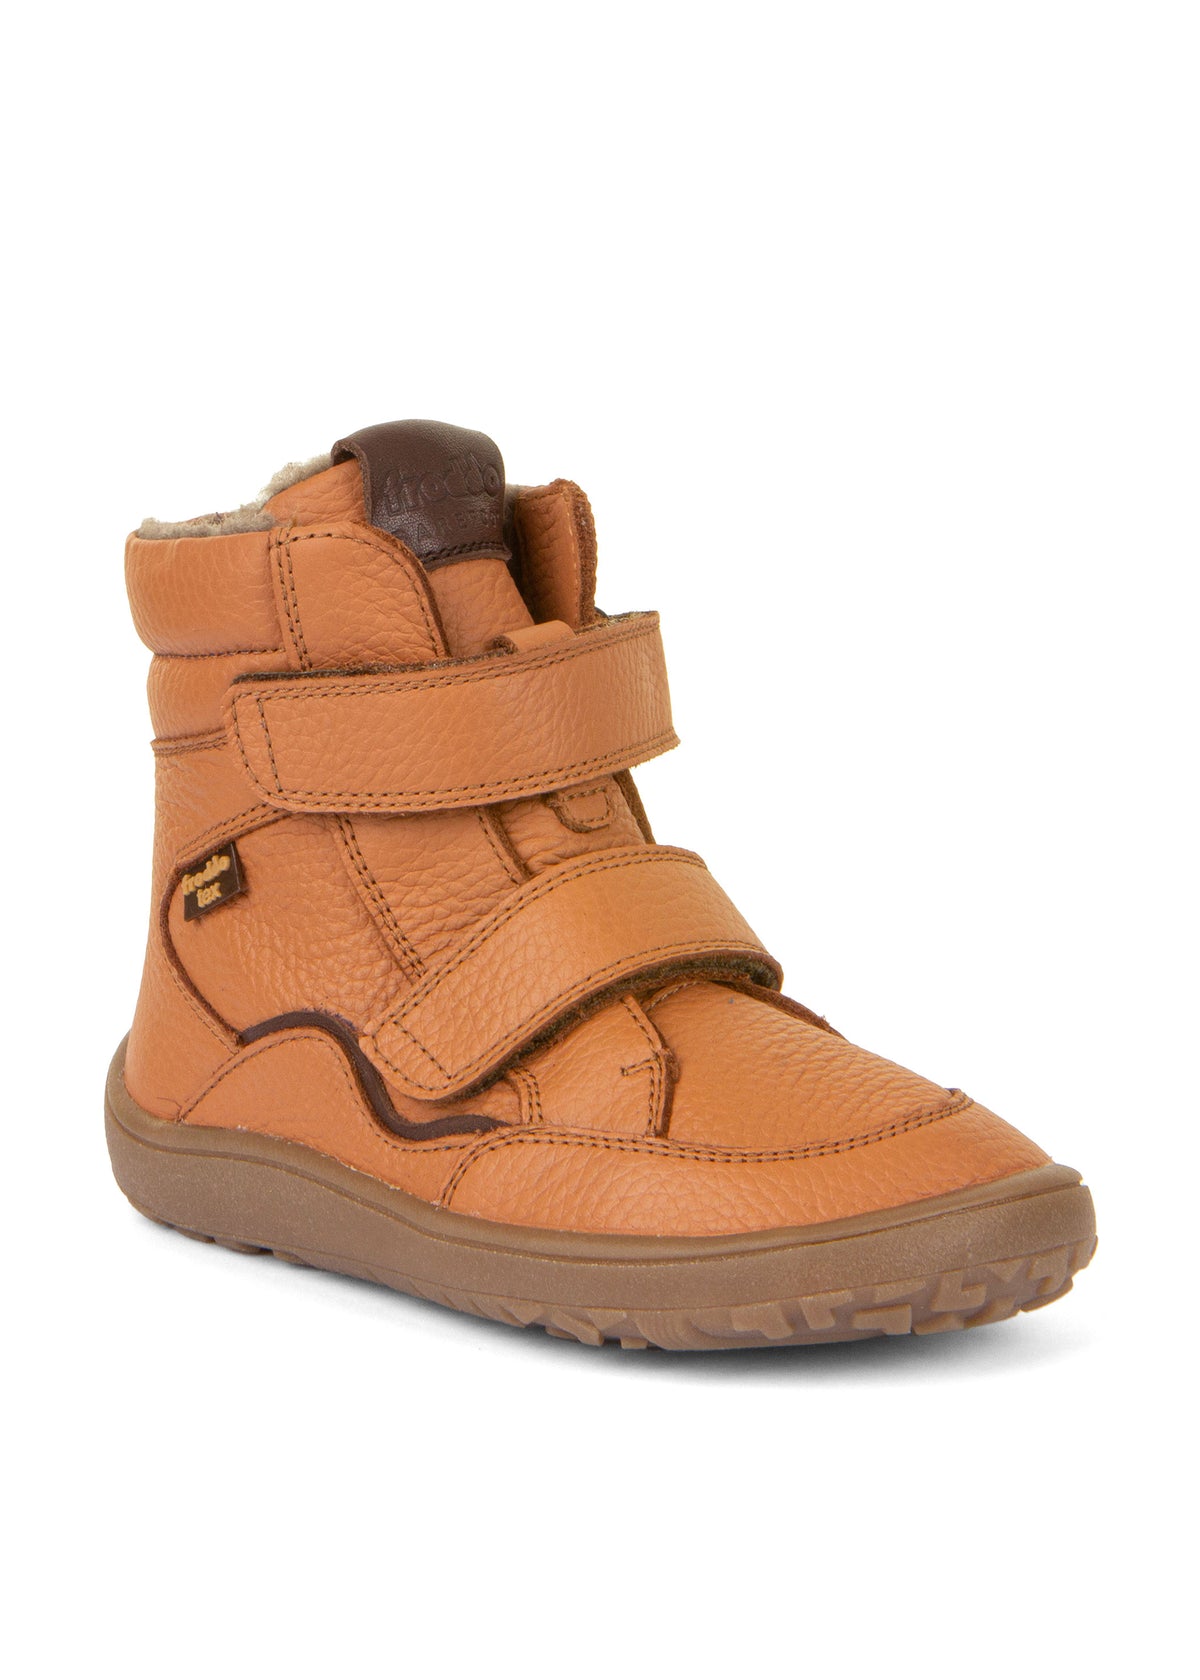 Children's barefoot shoes - leather winter shoes, TEX Winter, cognac brown